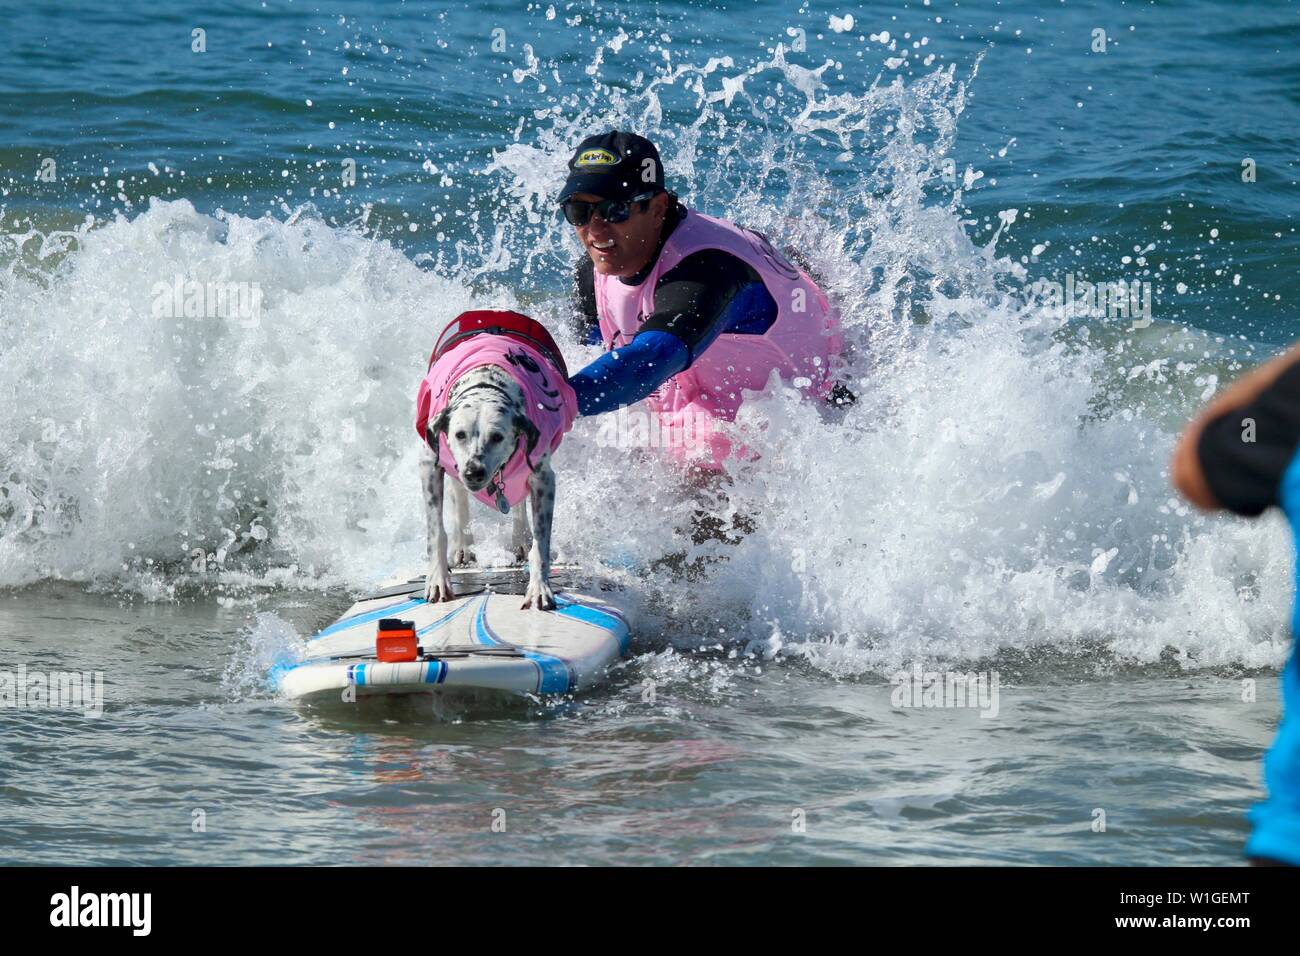 Dalmatian Dog surfing in a dog surfing competition in Huntington Beach, California Stock Photo